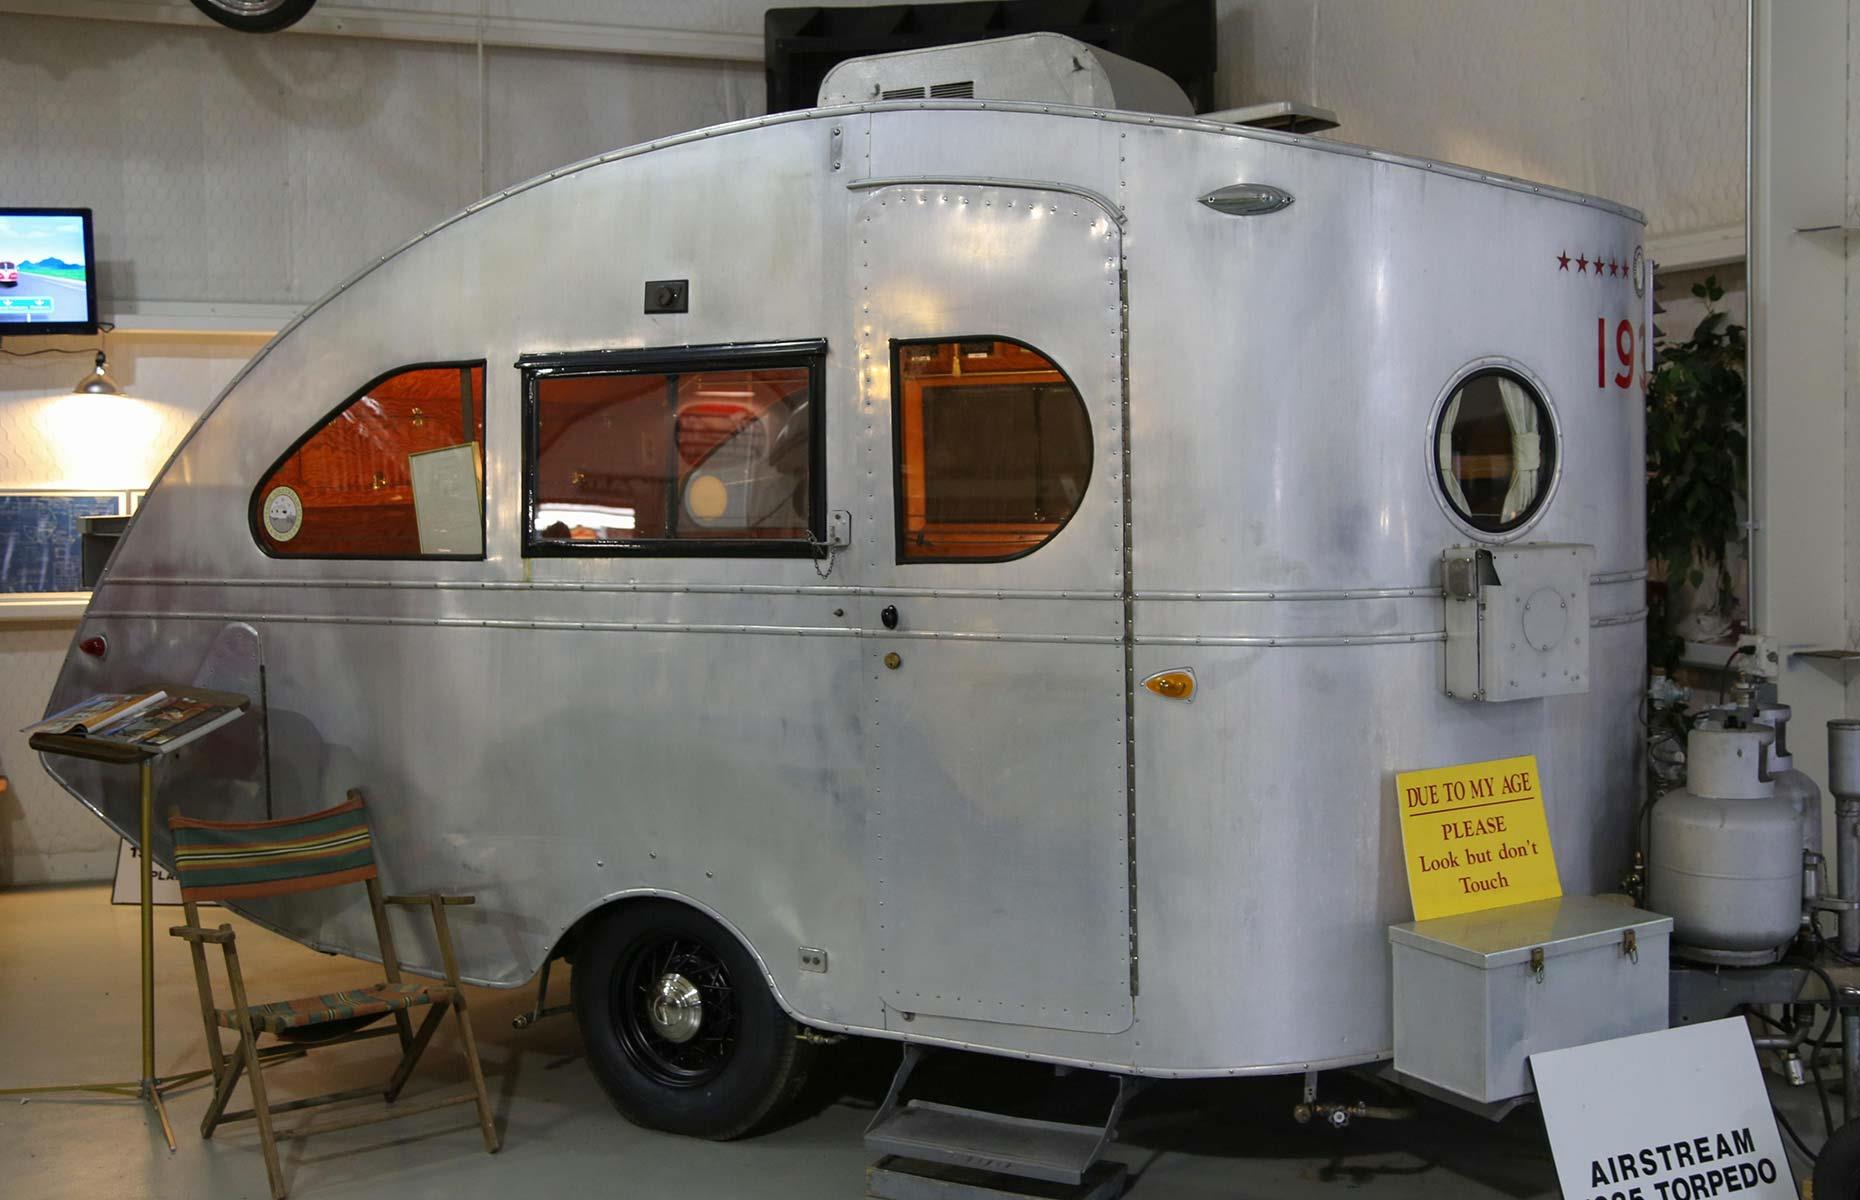 <p>The fledgling firm completed its first factory-produced model, the Torpedo (pictured), in 1932, and launched two larger models soon after: the Silver Cloud and the Airlite. A couple of years later, Wally Byam adopted the name "Airstream", a perfect moniker for the company's teardrop-shaped trailers, which cruised down the road "like a stream of air".</p>